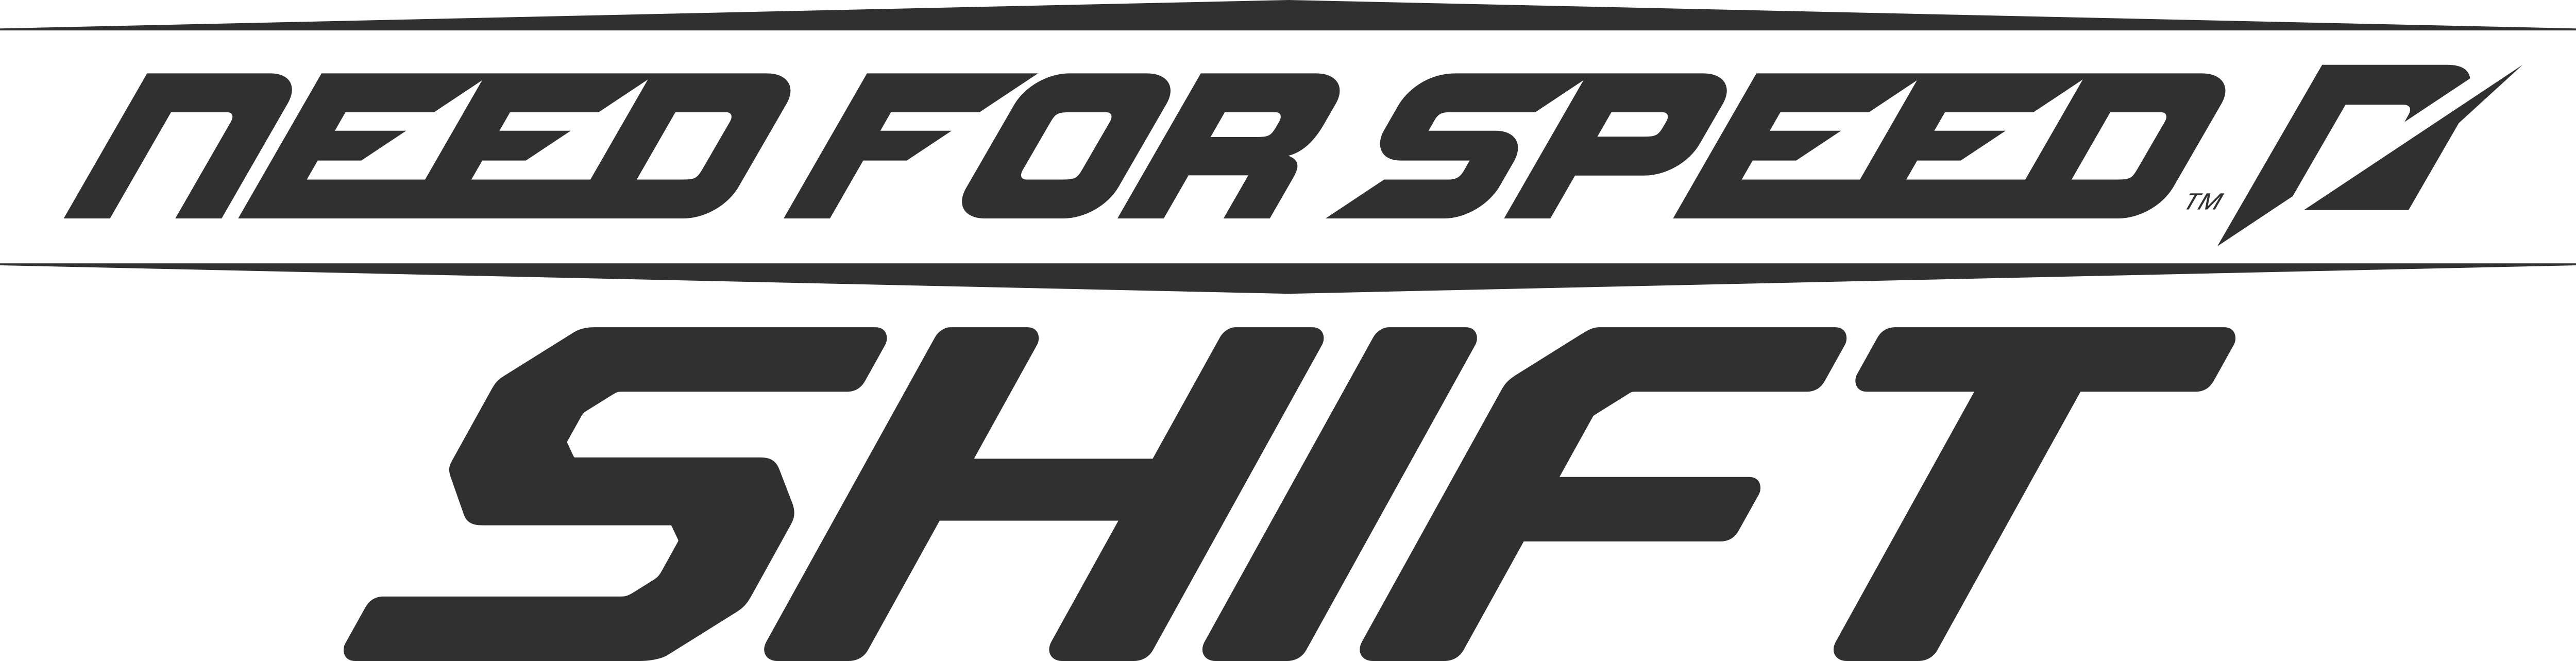 Need For Speed Logo Free PNG Image